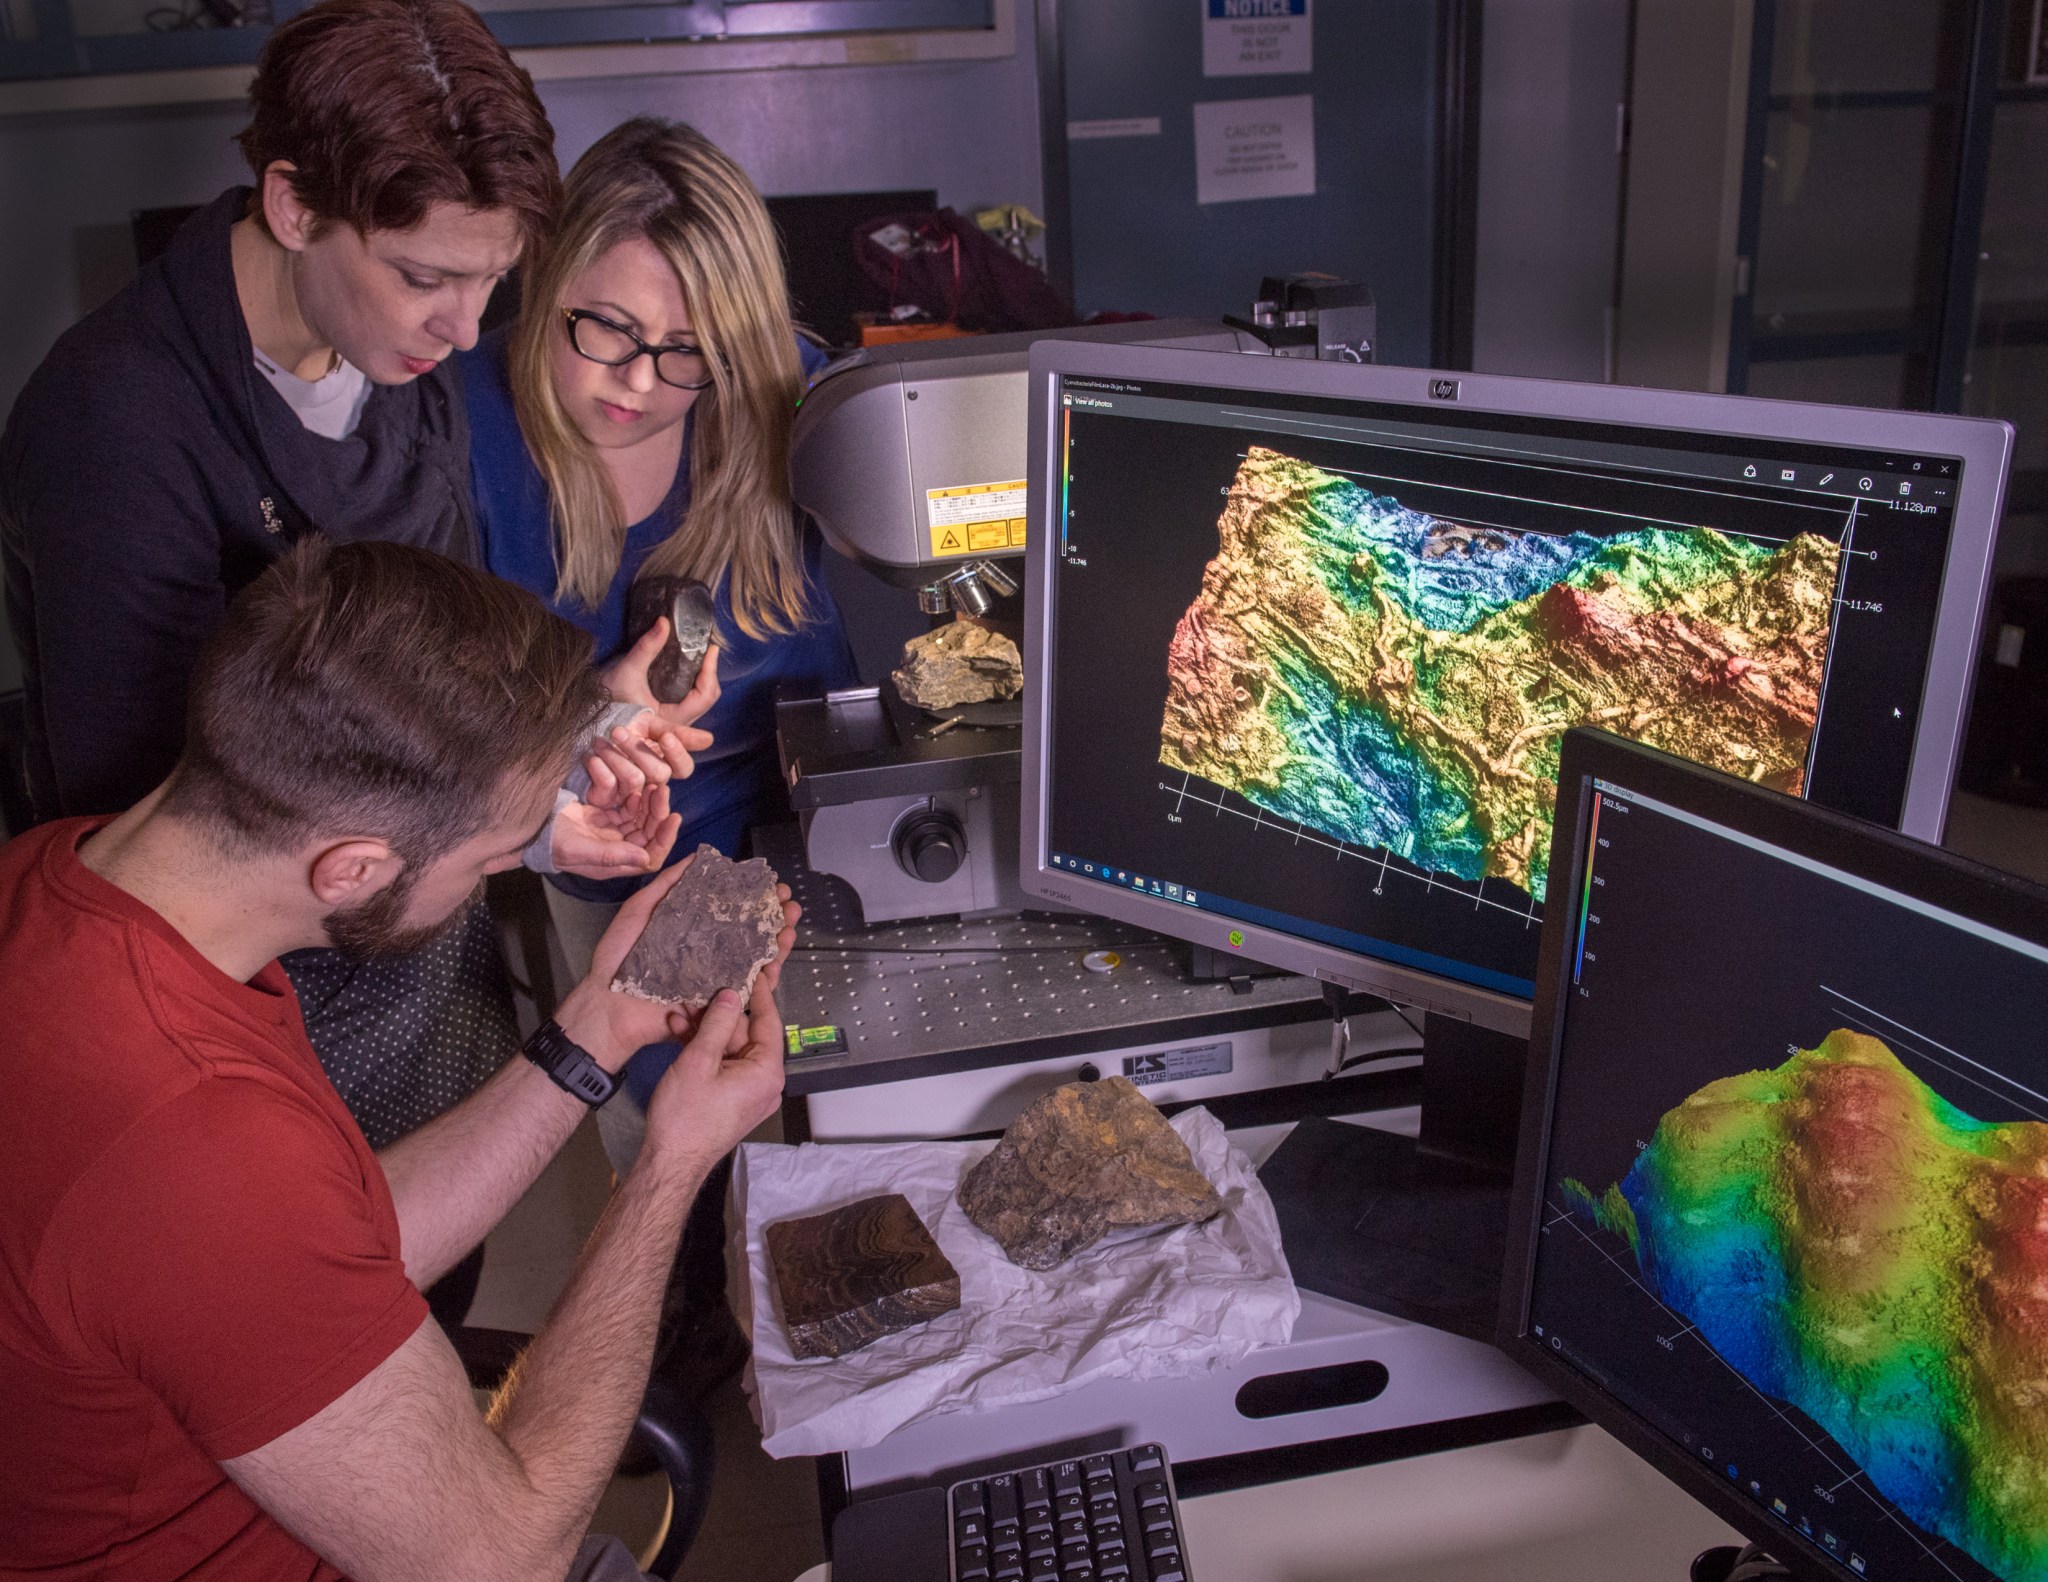 Three people examine rock and wood samples as a topographical map is shown on the screens in front of them.